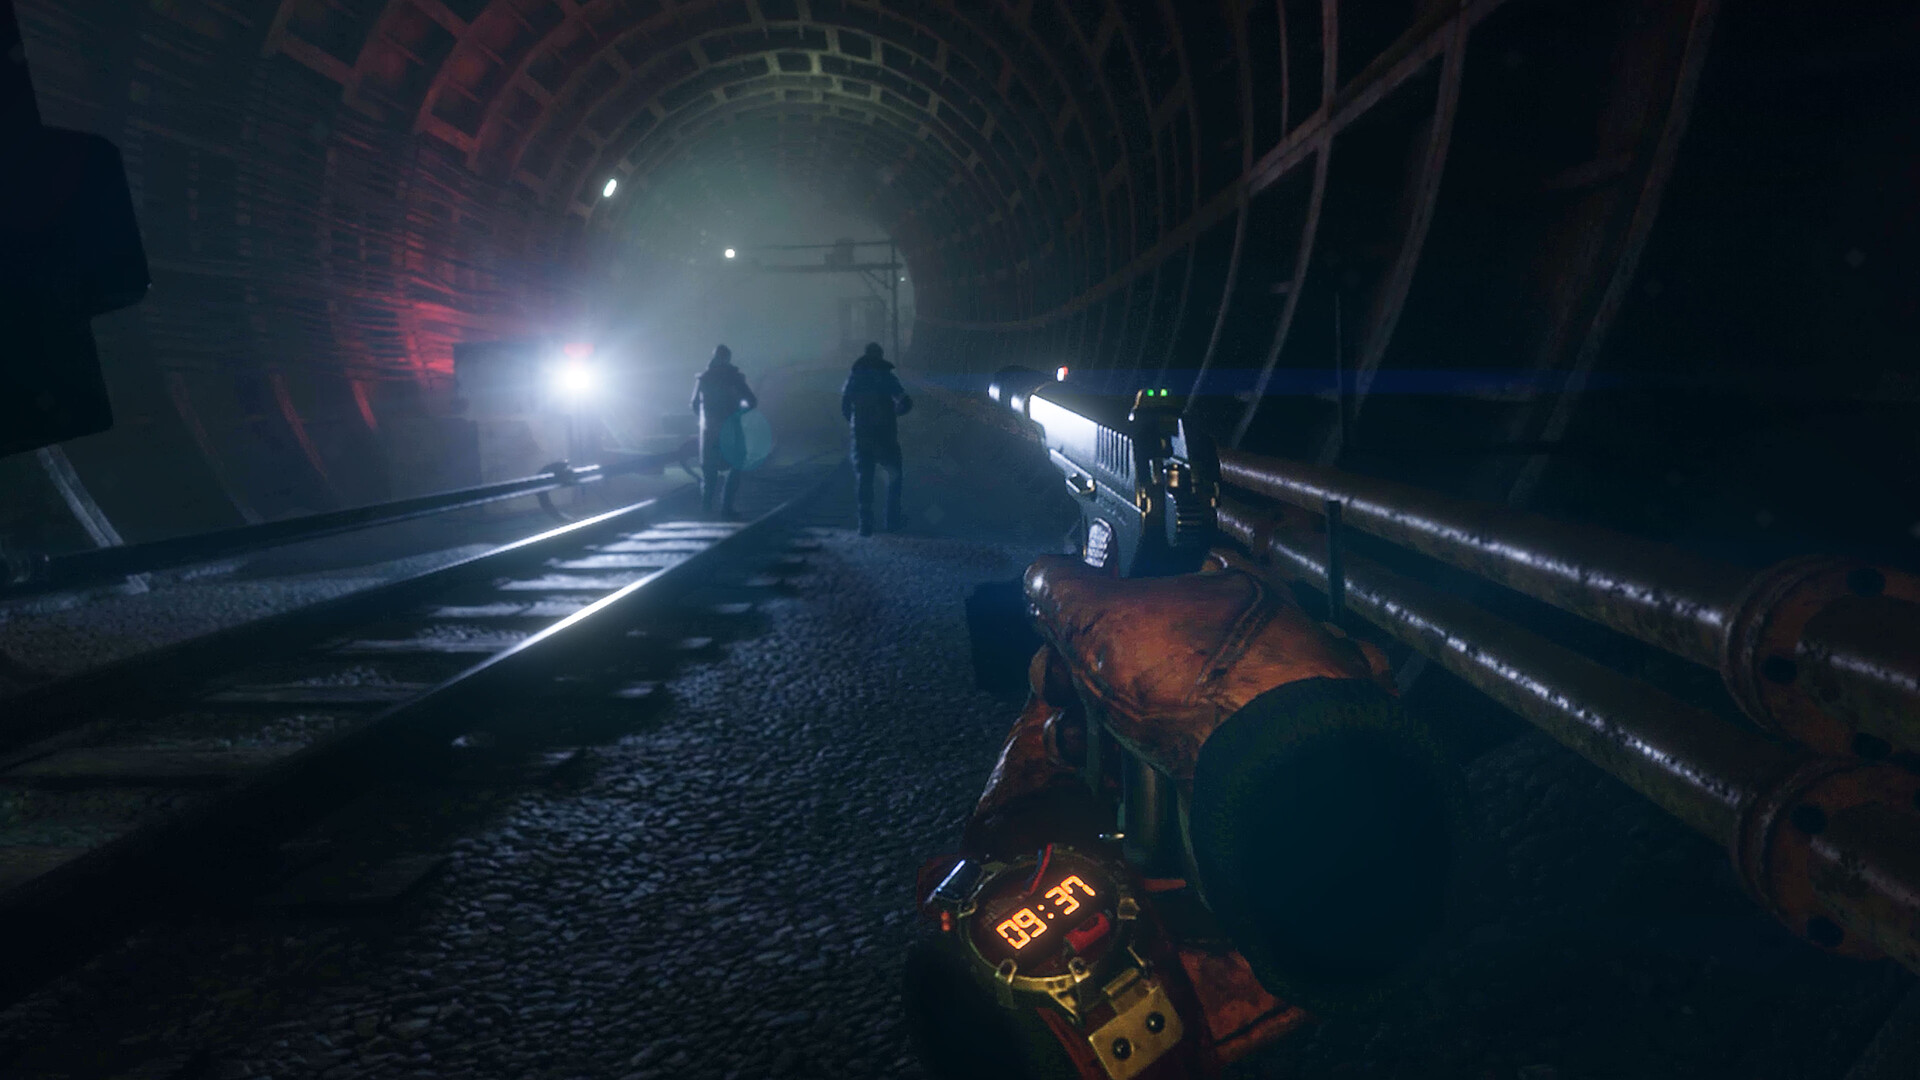 VR shooter Metro Awakening to support textual Ukrainian localisation: release scheduled for 2024